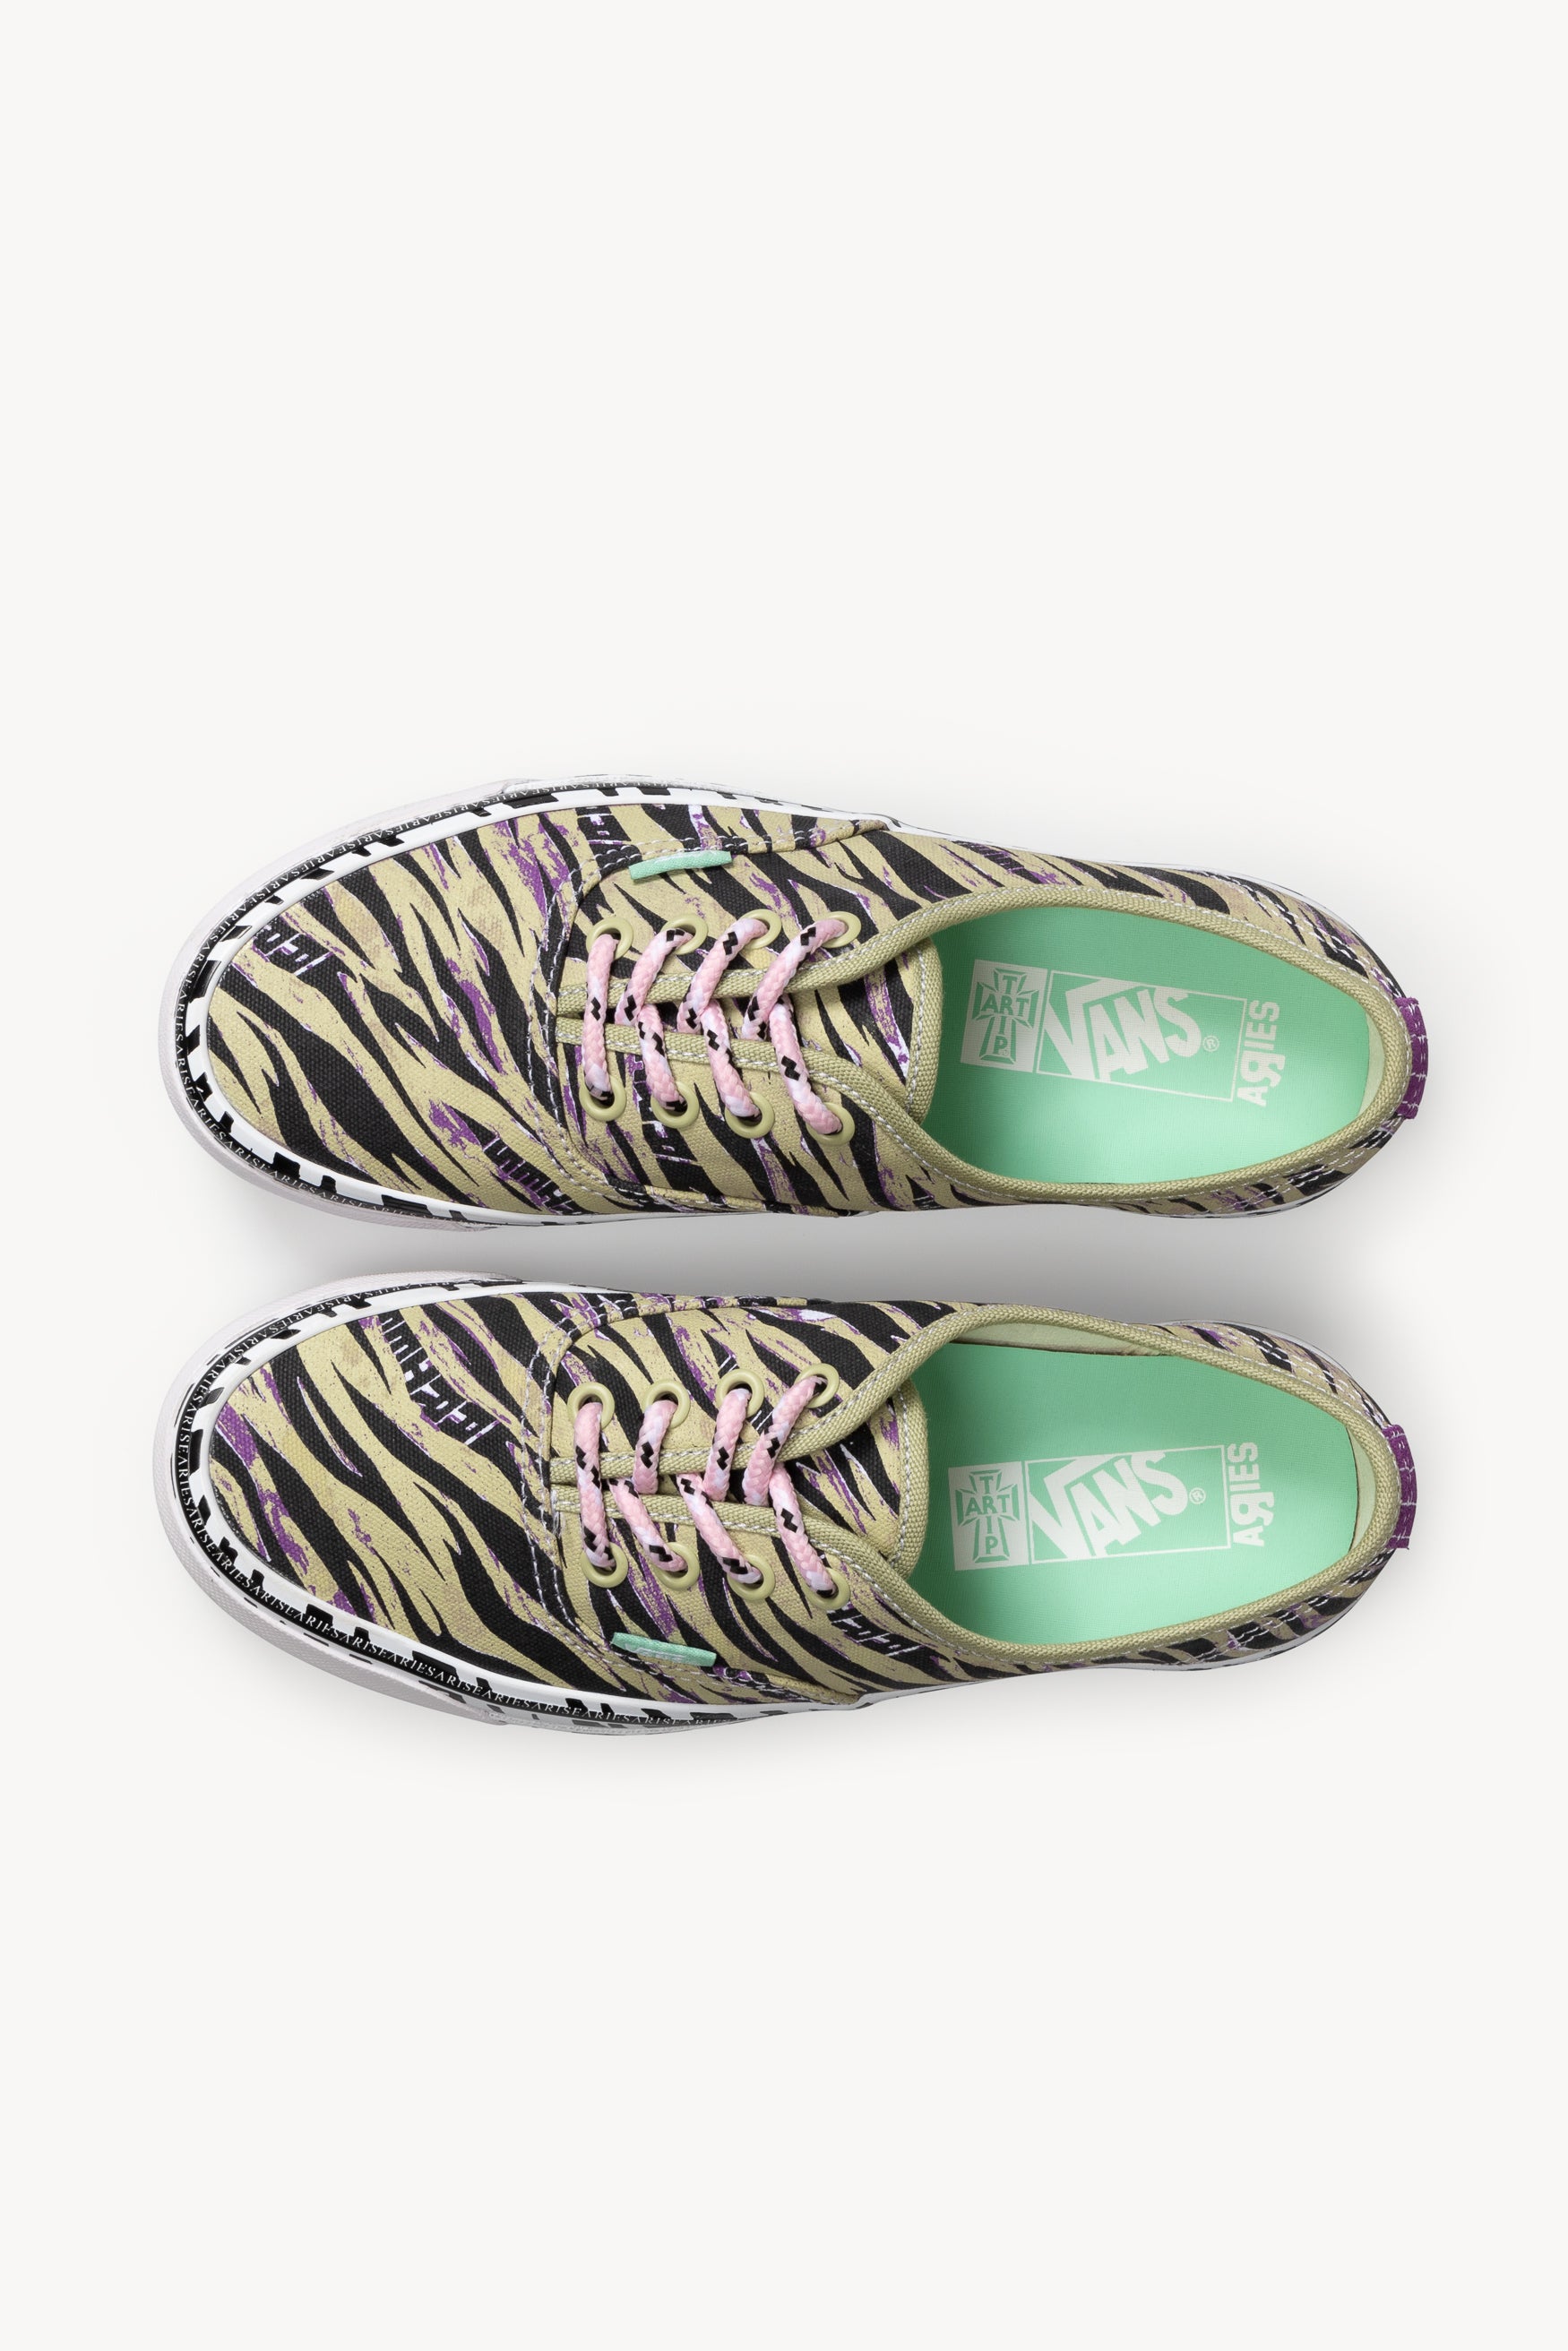 Load image into Gallery viewer, Aries x Vault by Vans Tiger OG Authentic LX